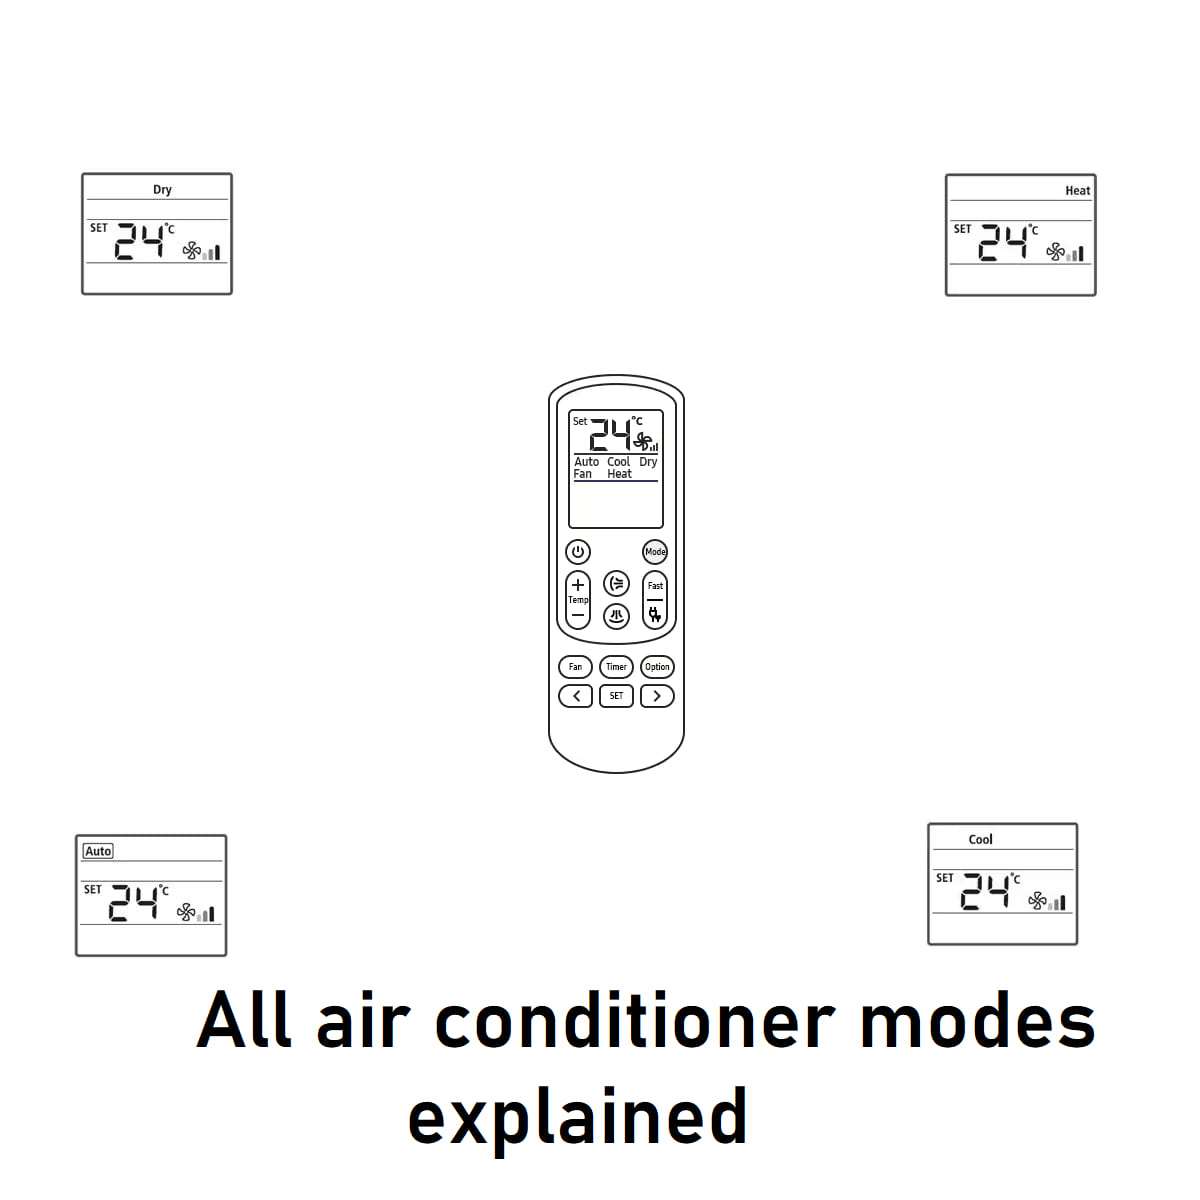 Air conditioner modes explained